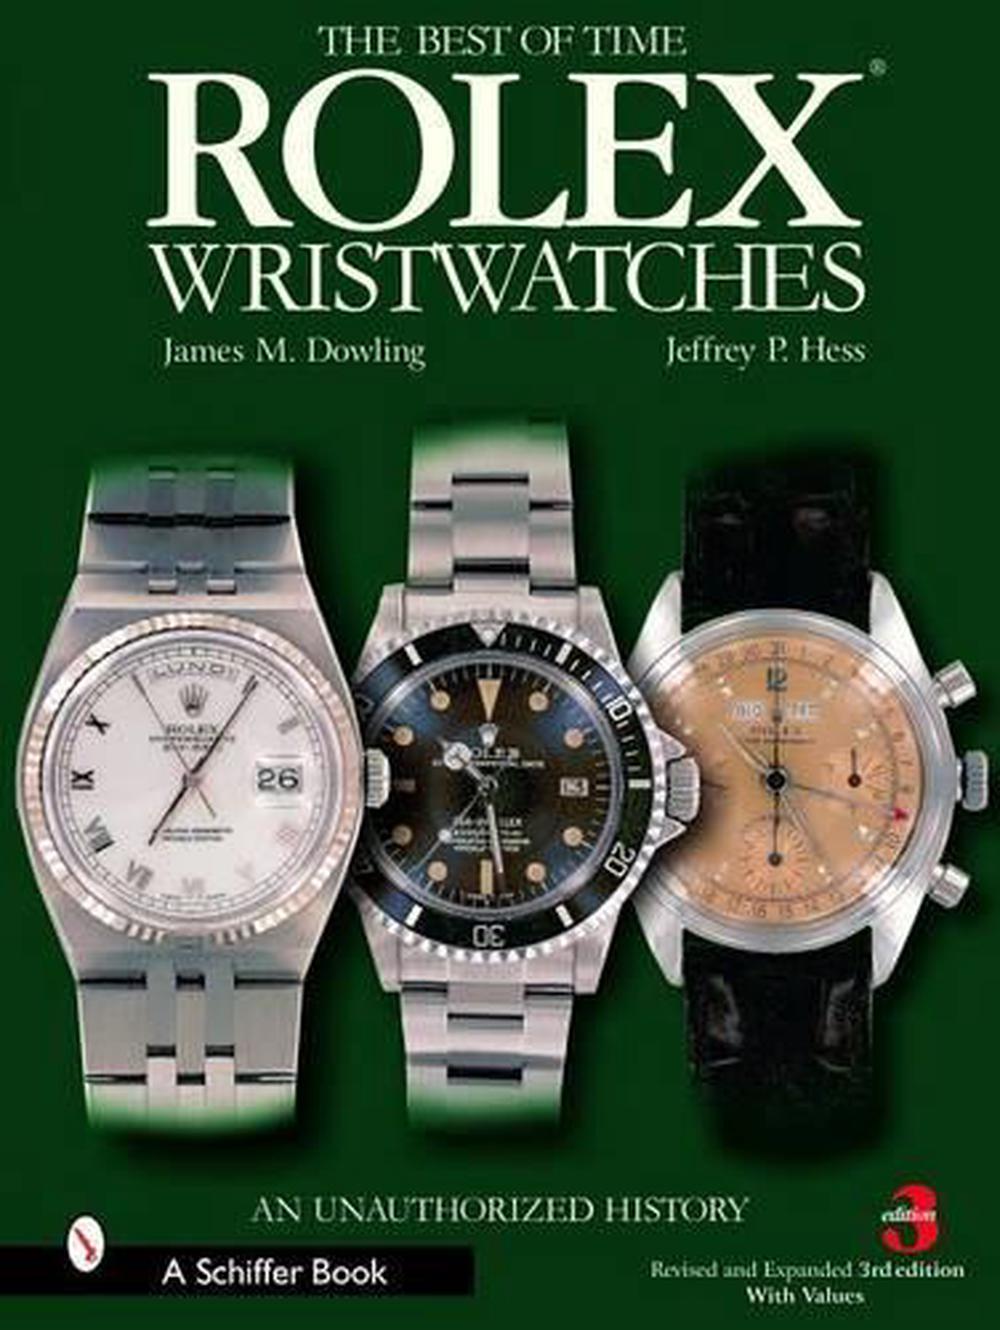 The Best of Time Rolex Wristwatches An Unauthorized History by James M